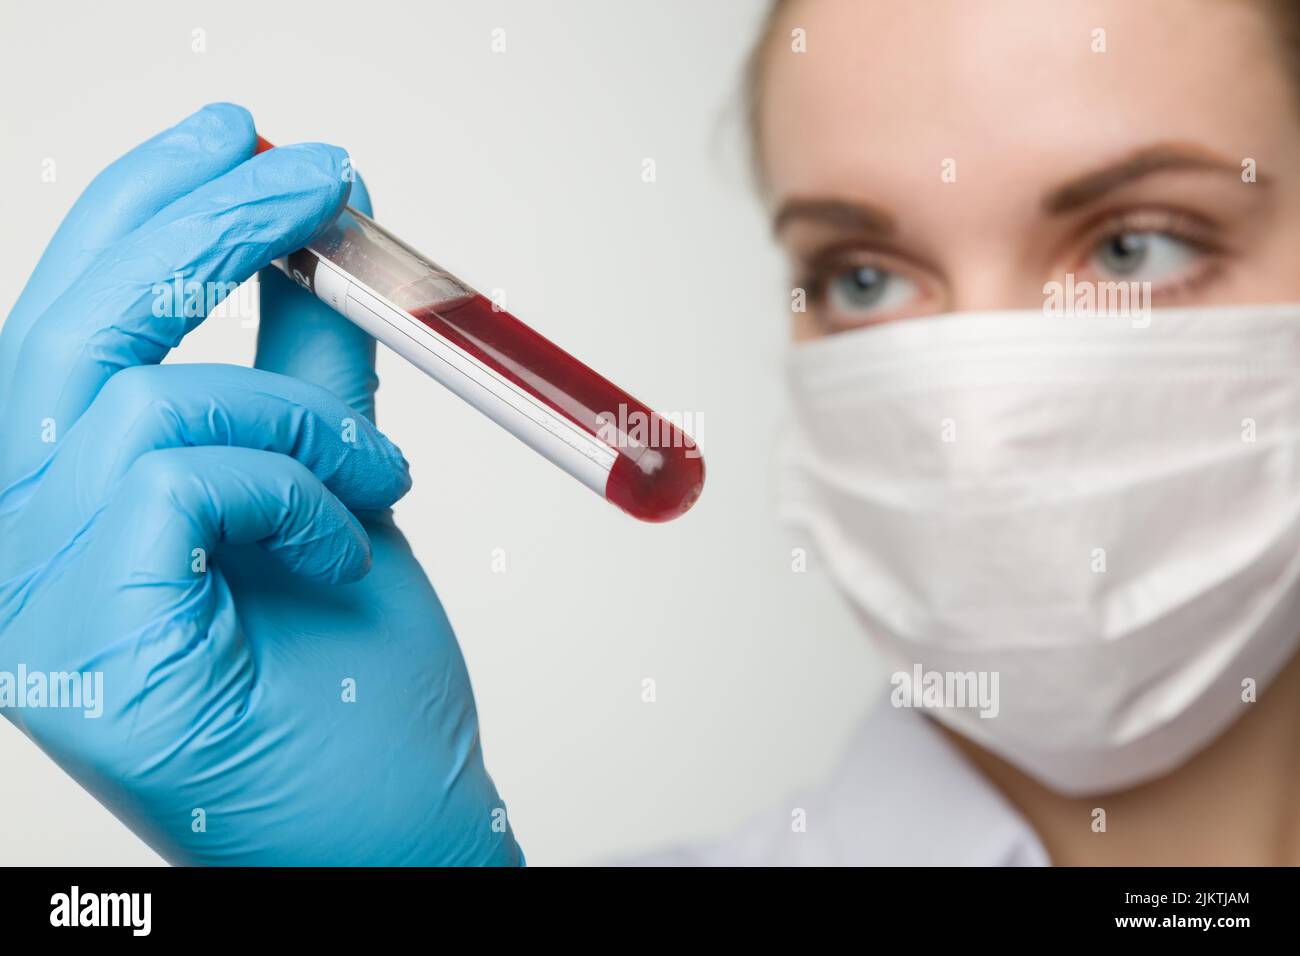 young woman with medical face mask and medical gloves is handling a blood test tube Stock Photo